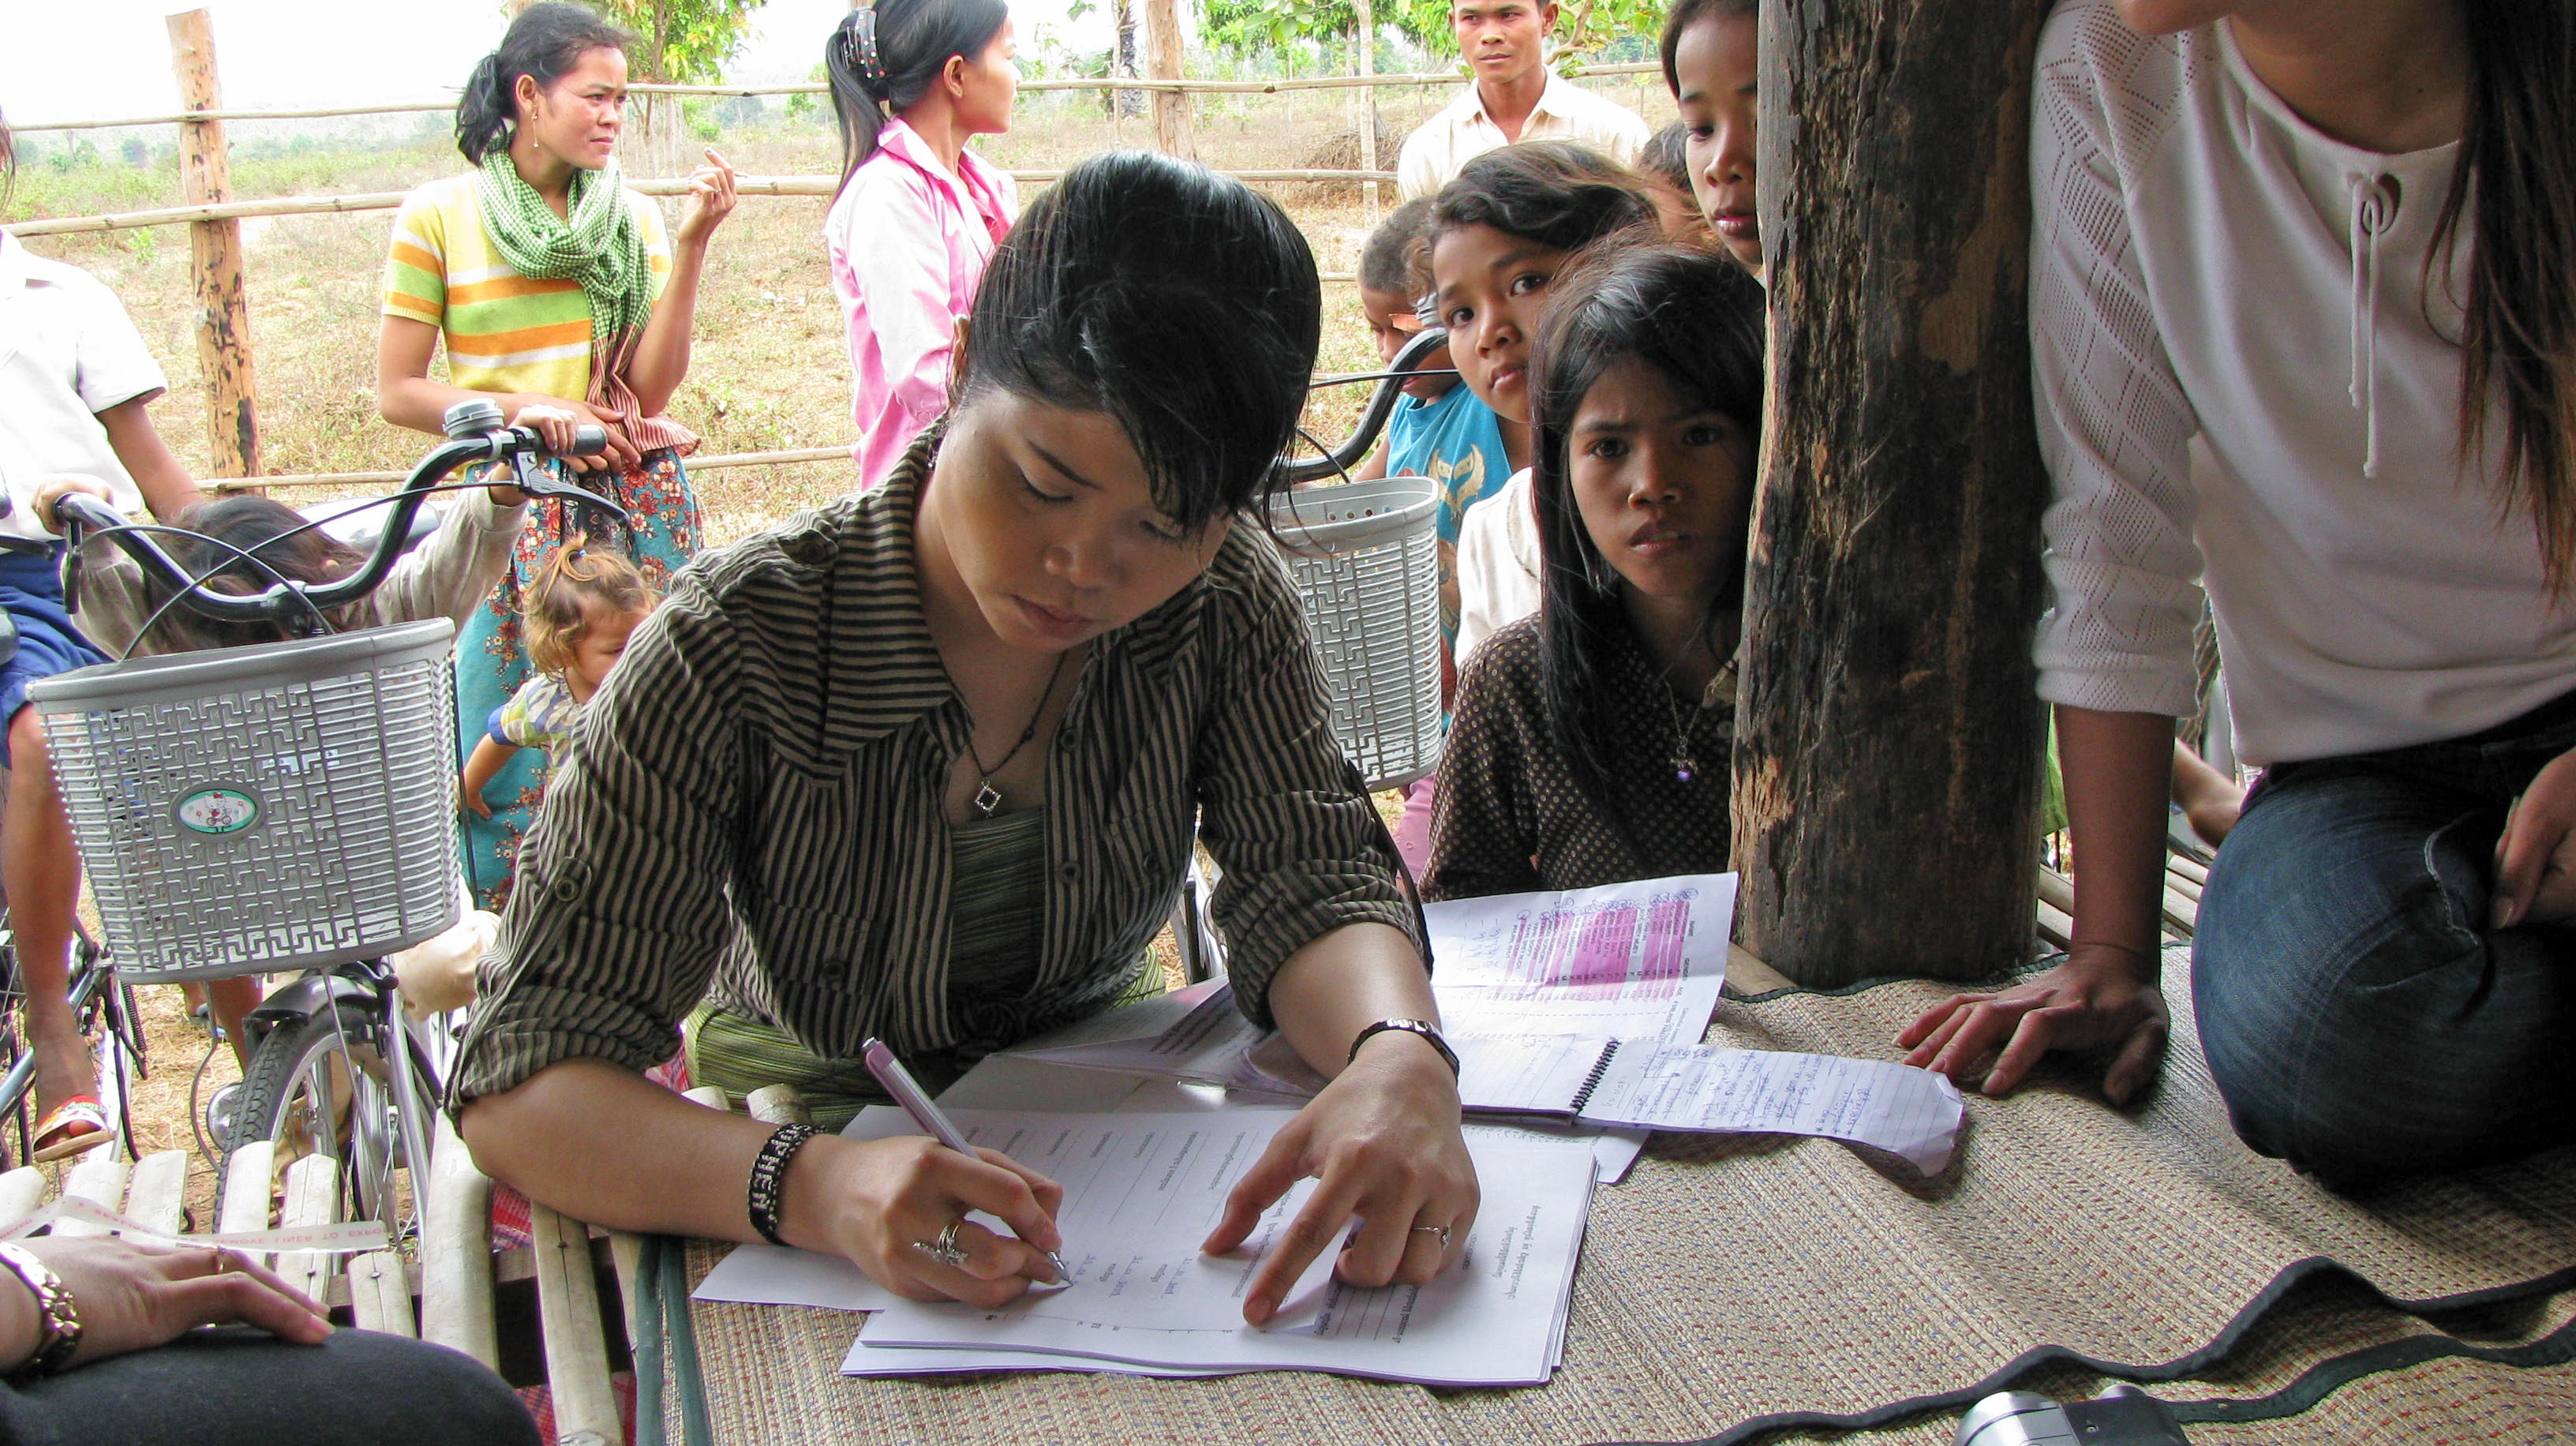 In rural areas making sure childeren attend school and not stay home or work in the rice fields is difficult.